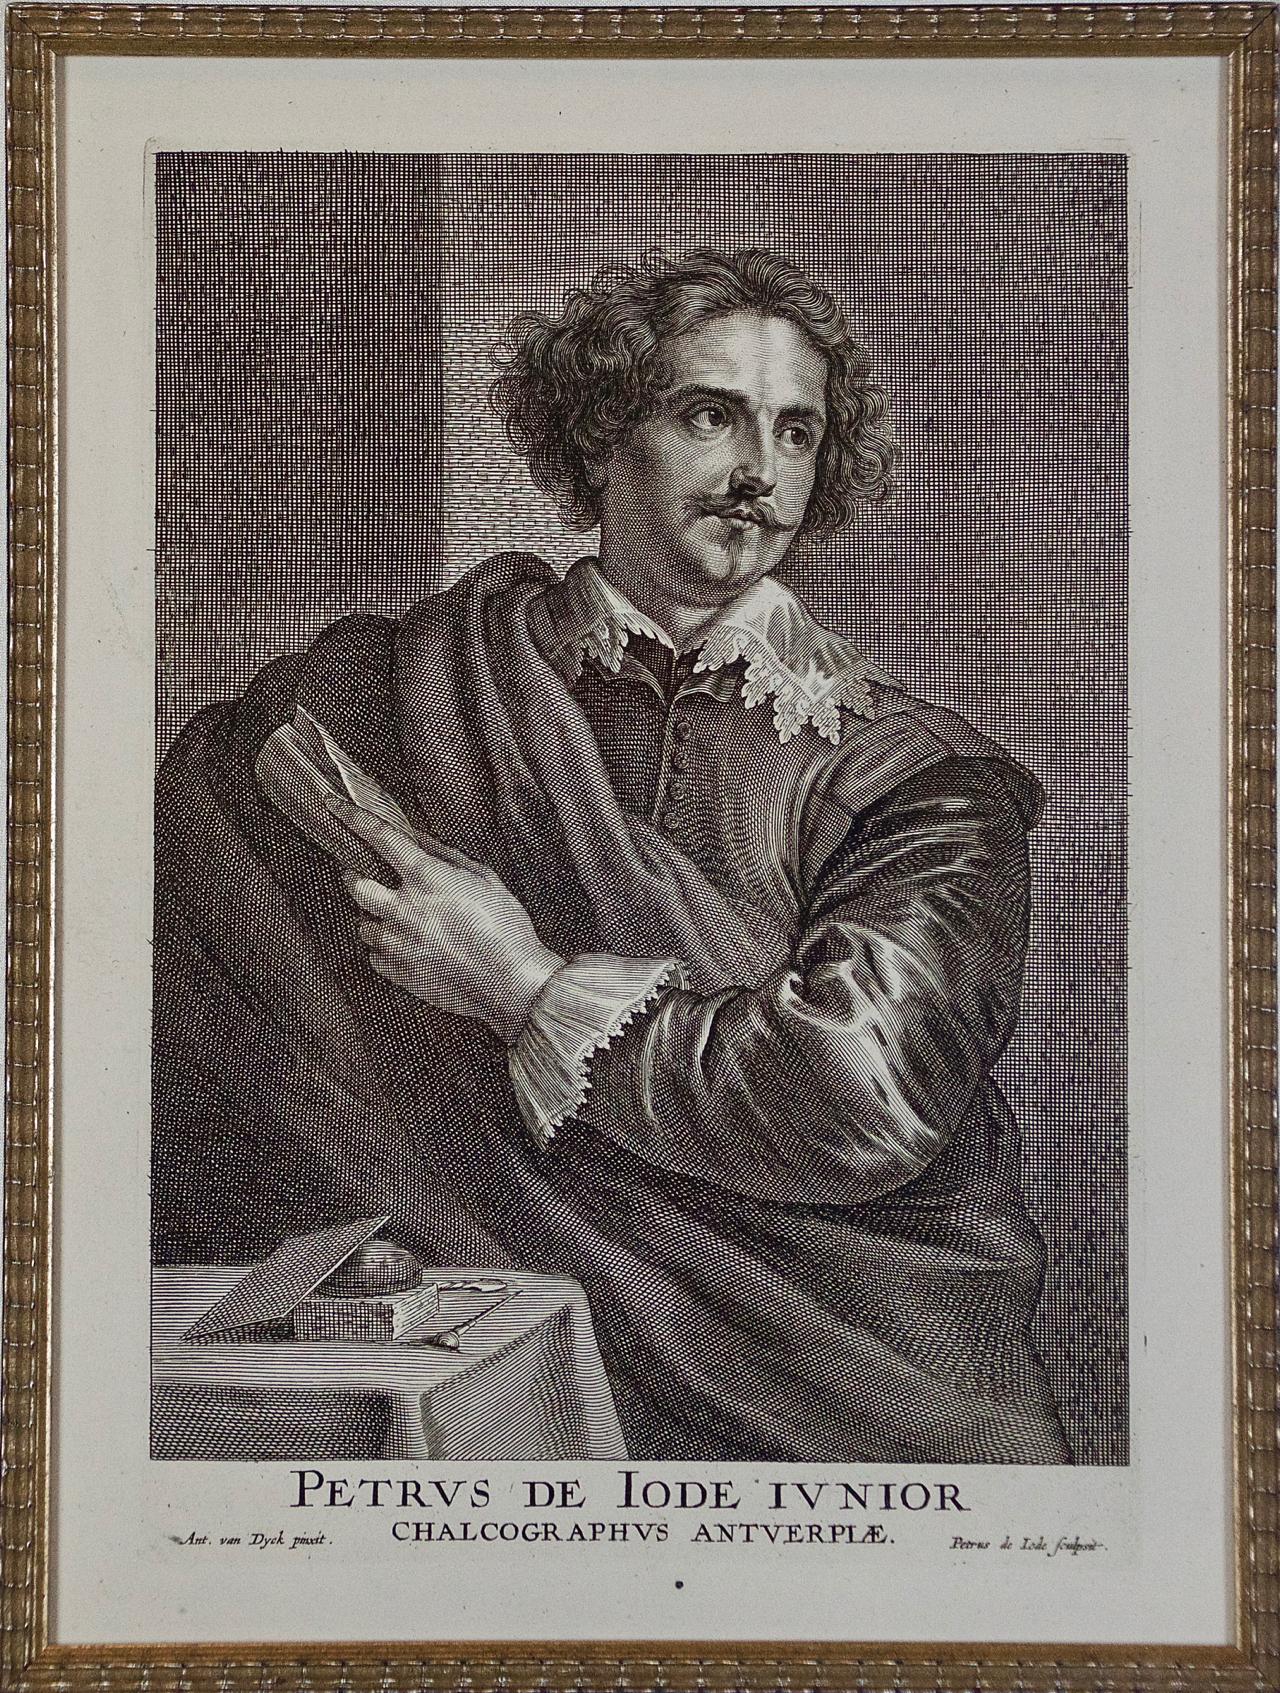 A Framed Portrait of Old Master Artist Petrus de Jode by Anthony van Dyck - Print by (After) Anthony Van Dyck